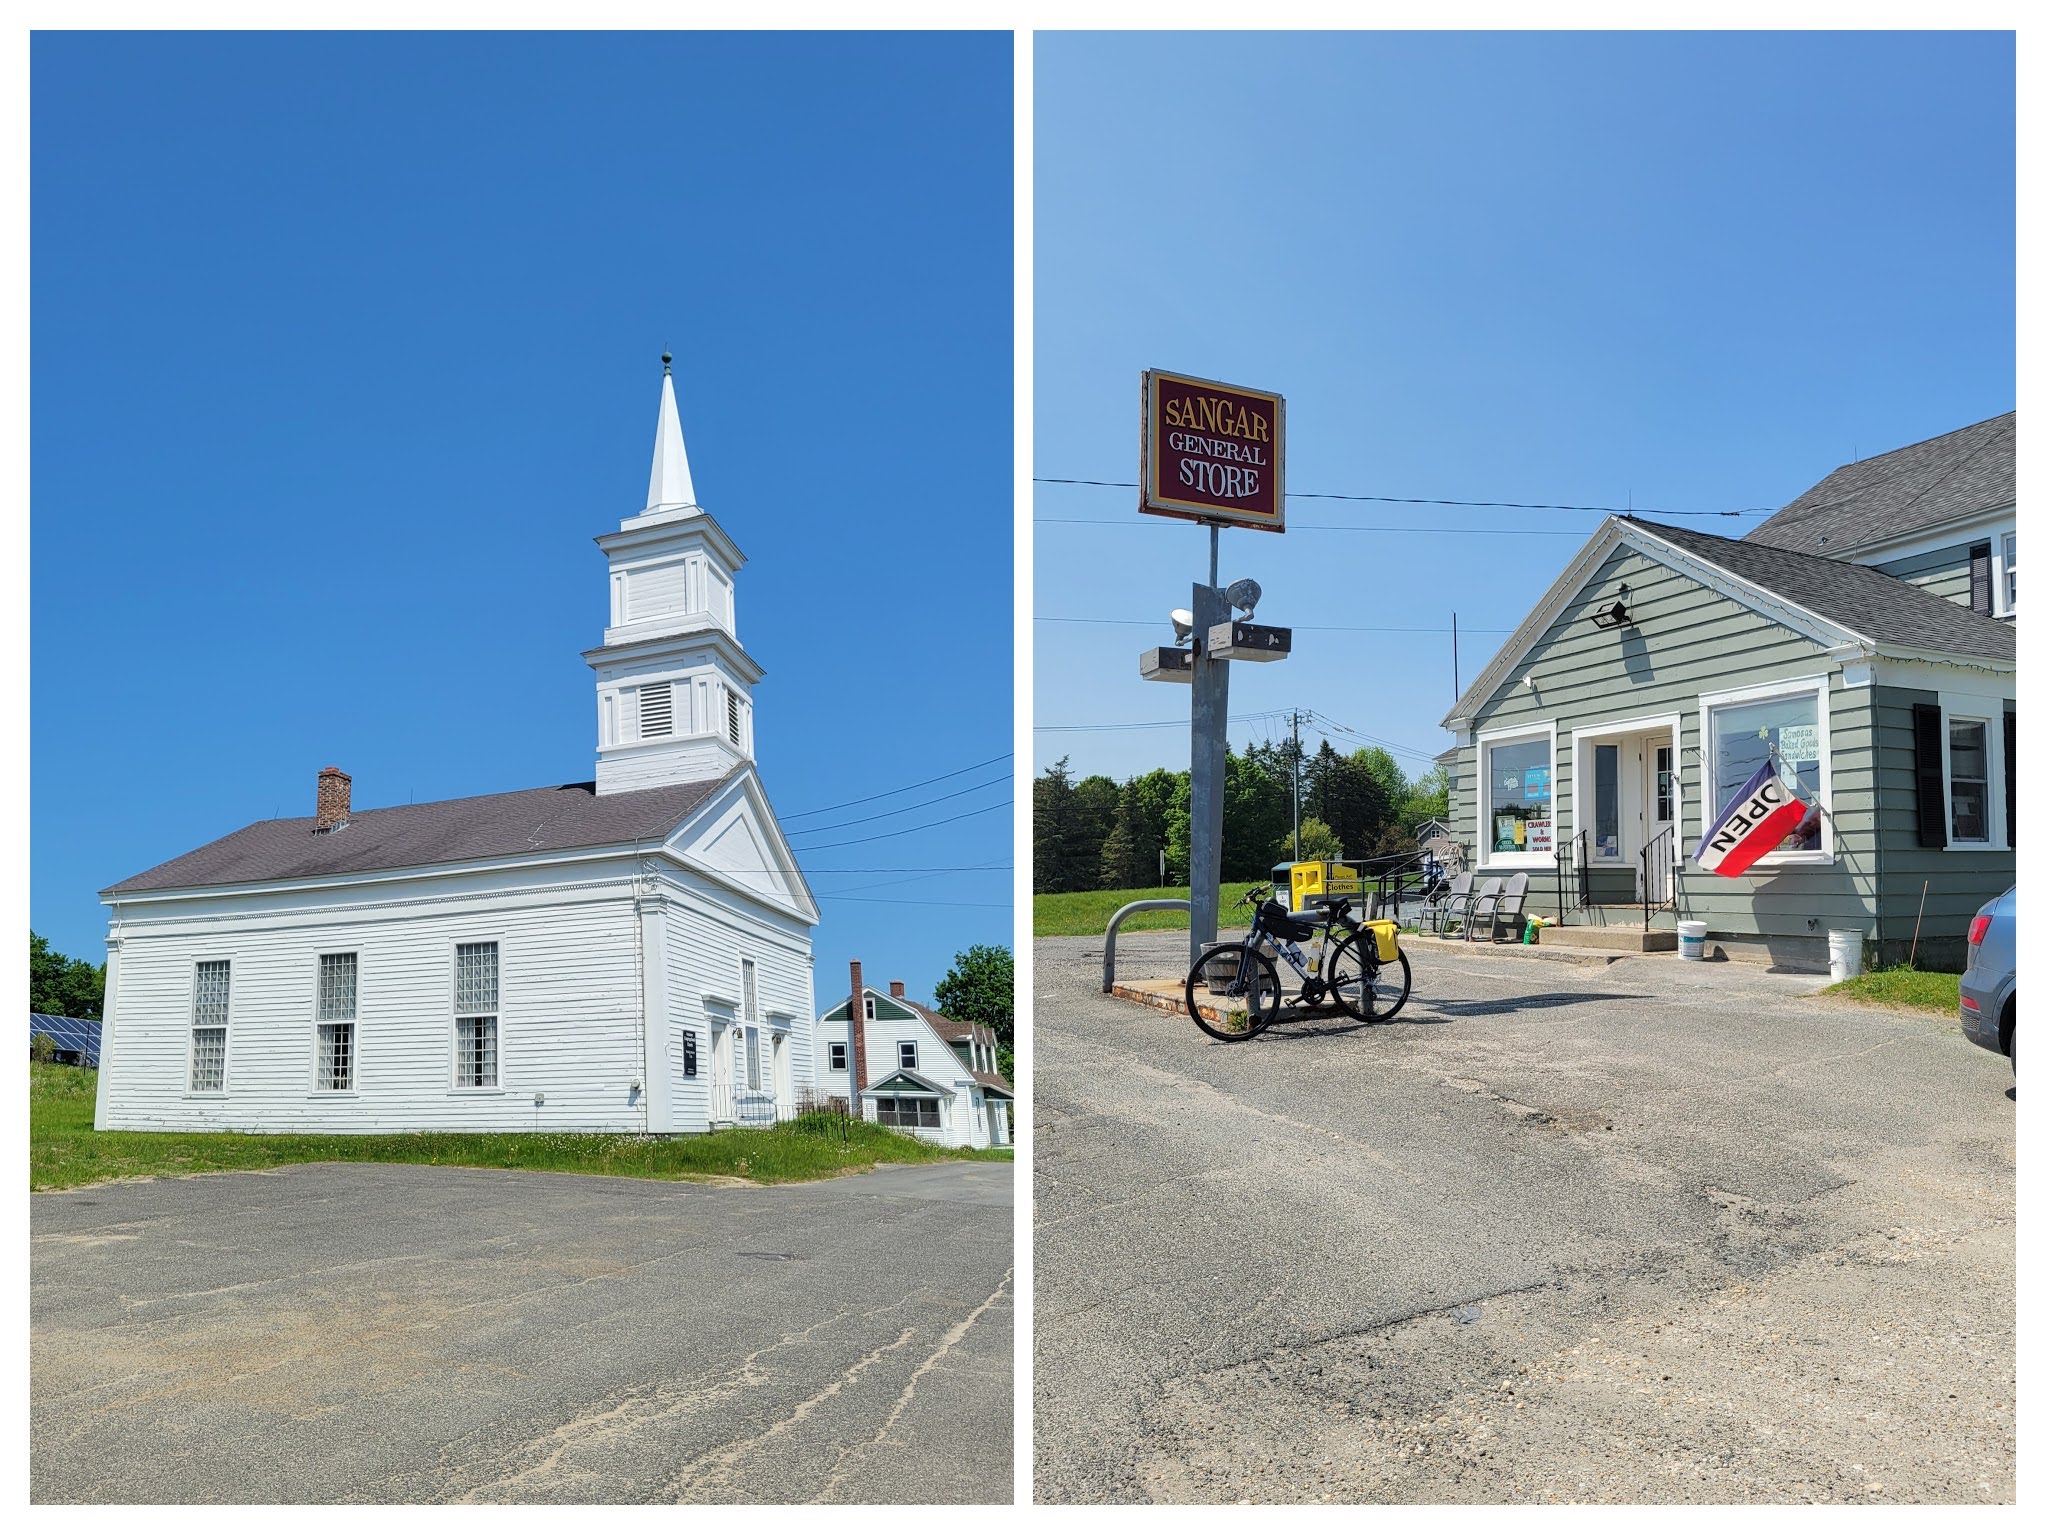 Windsor Congregation Hall, and the Sangar General Store